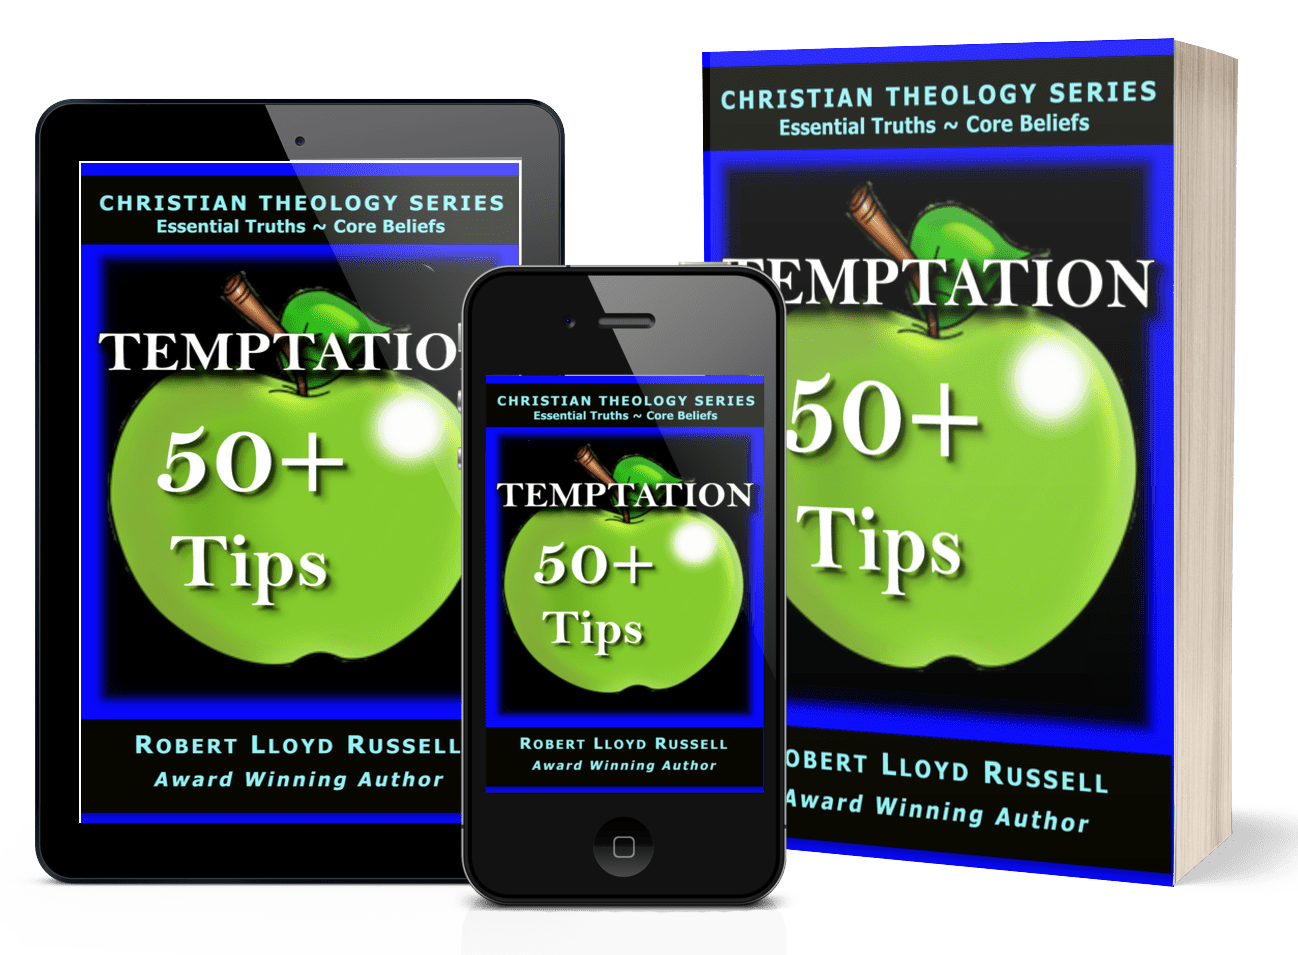 Book cover of Temptation-50-Tips